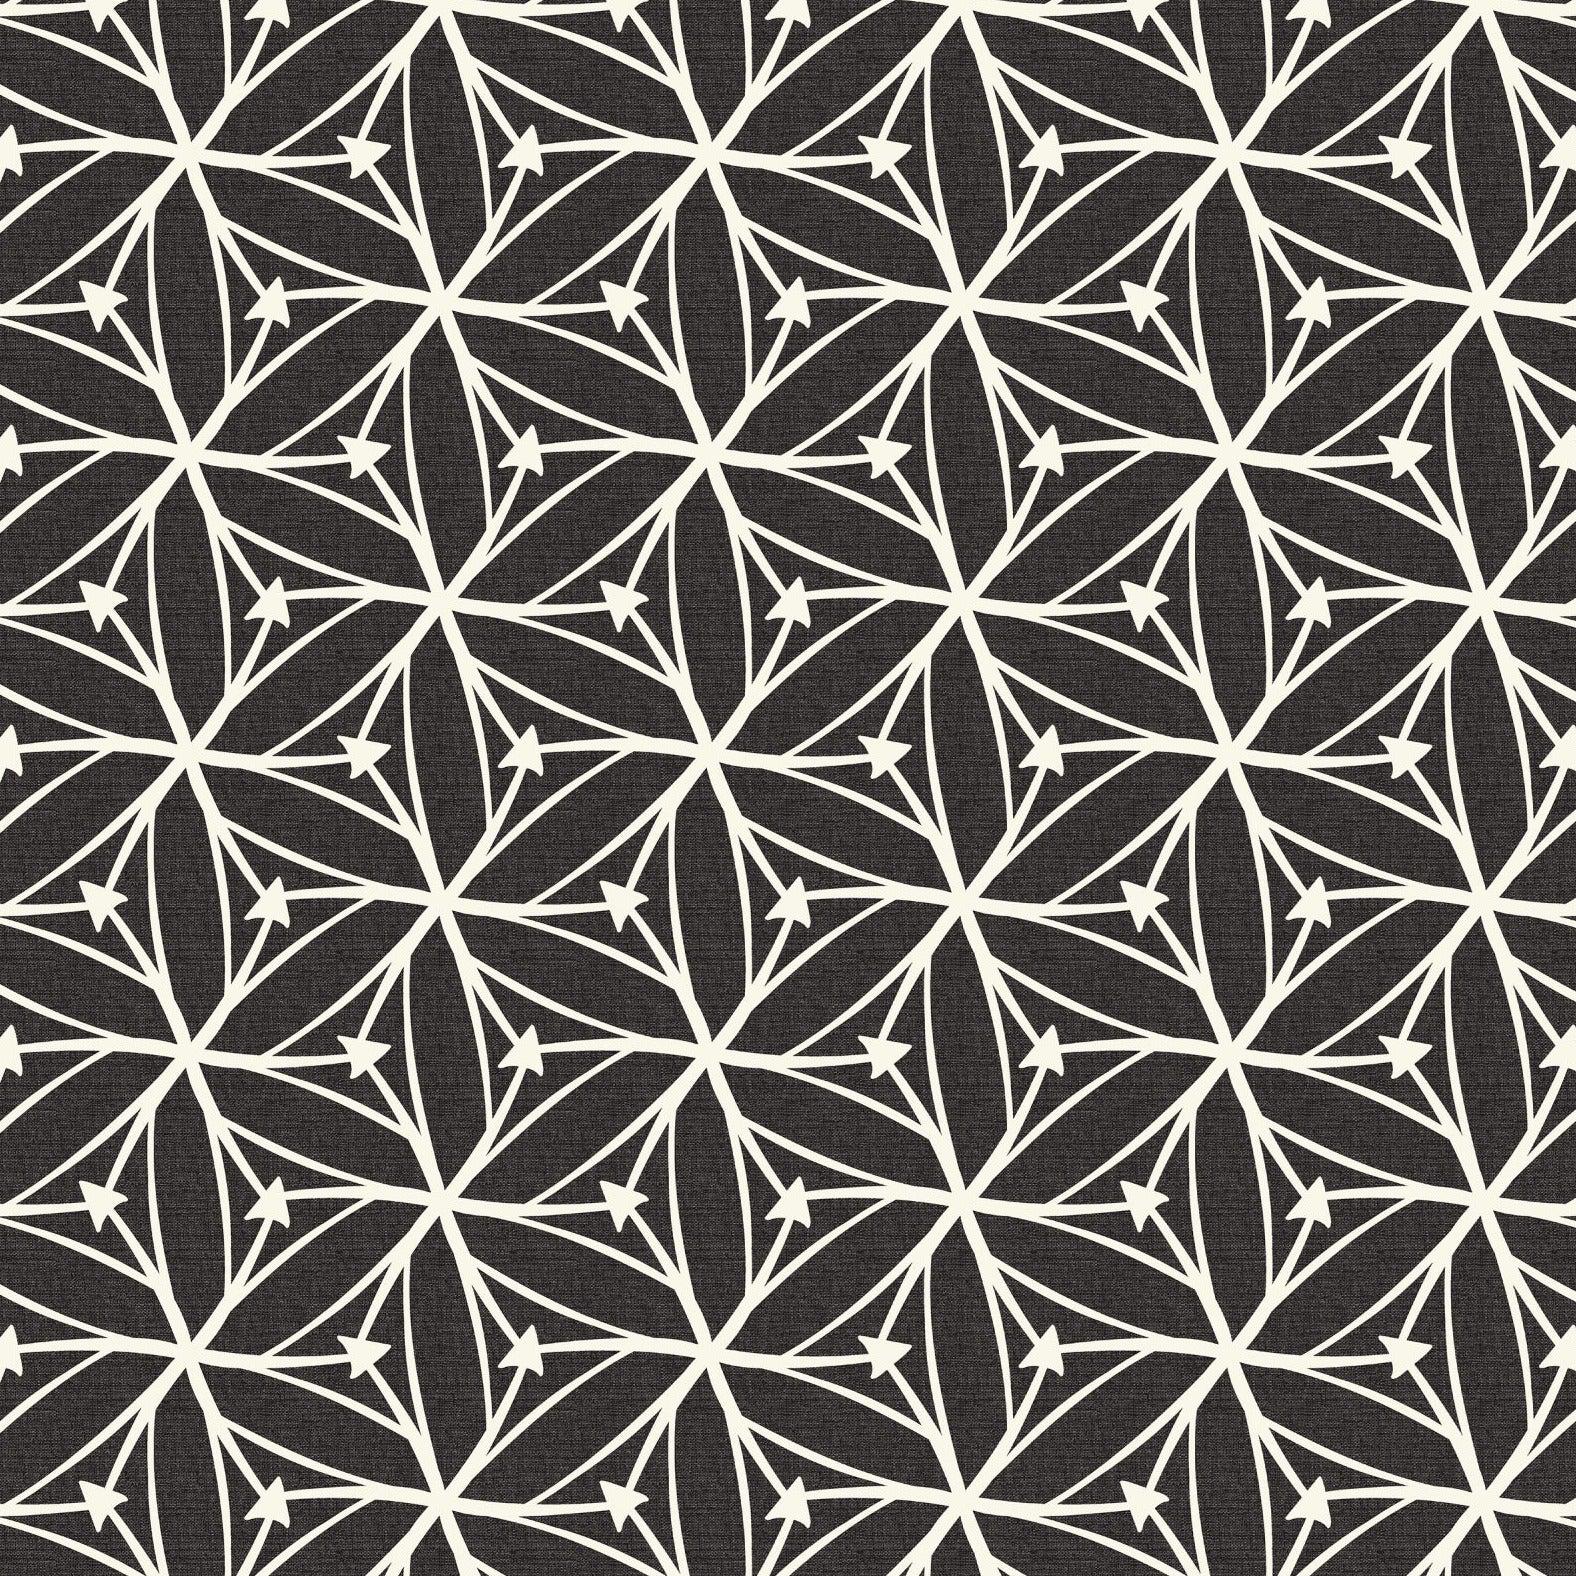 Cloud9-Stargazer Charcoal-fabric-gather here online